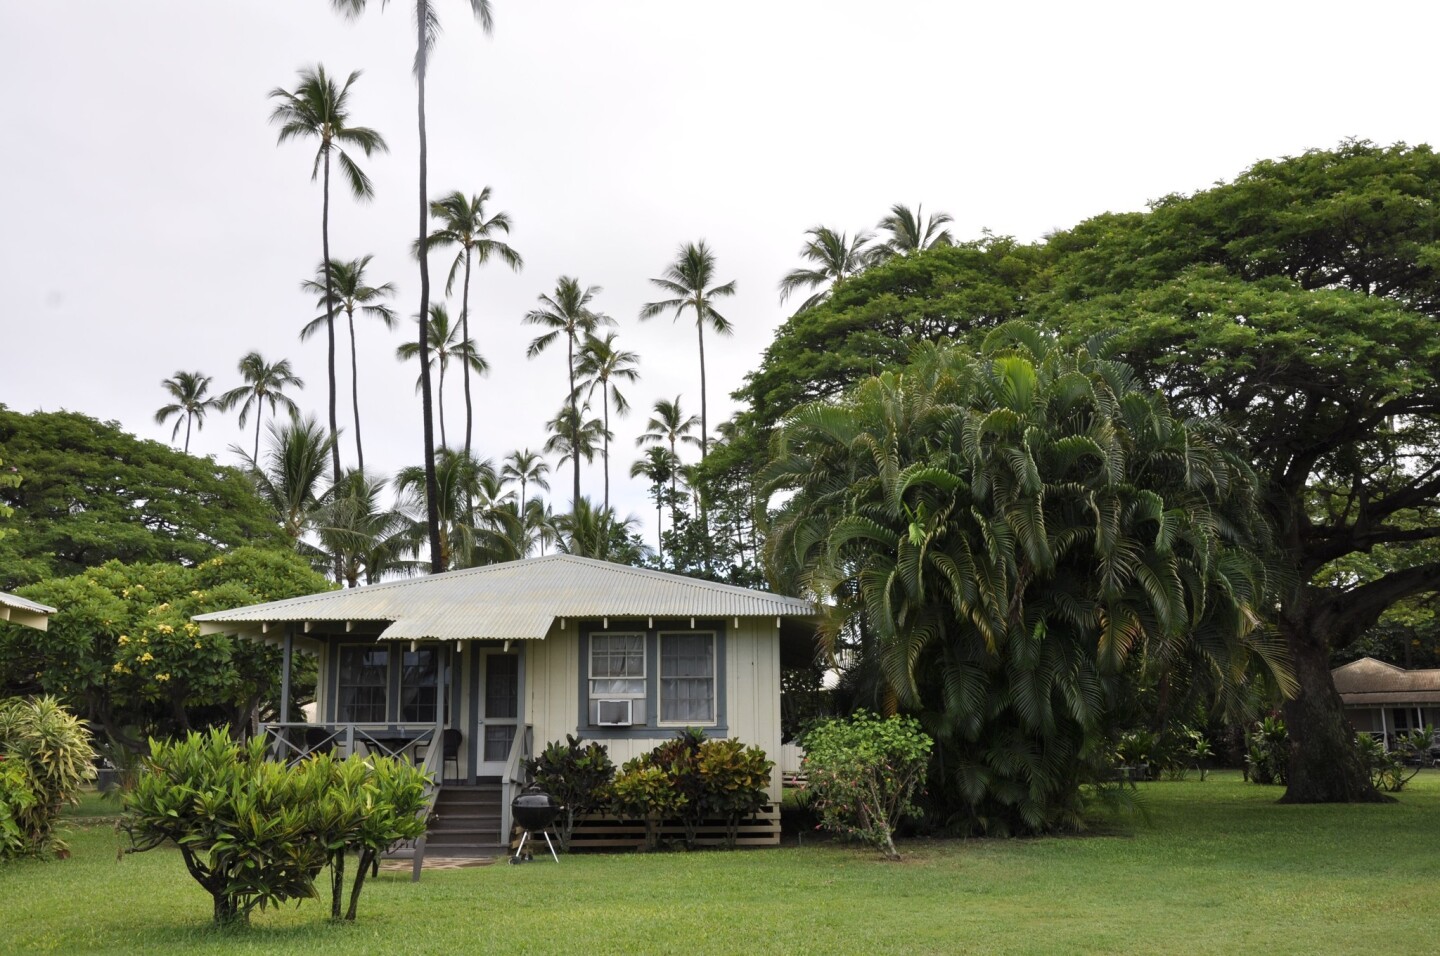 A collection of restored 19th and 20th century cottages, many of them residences of former sugar plantation workers, Waimea Plantation Cottages offers peaceful, rustic and historic lodging by the sea.